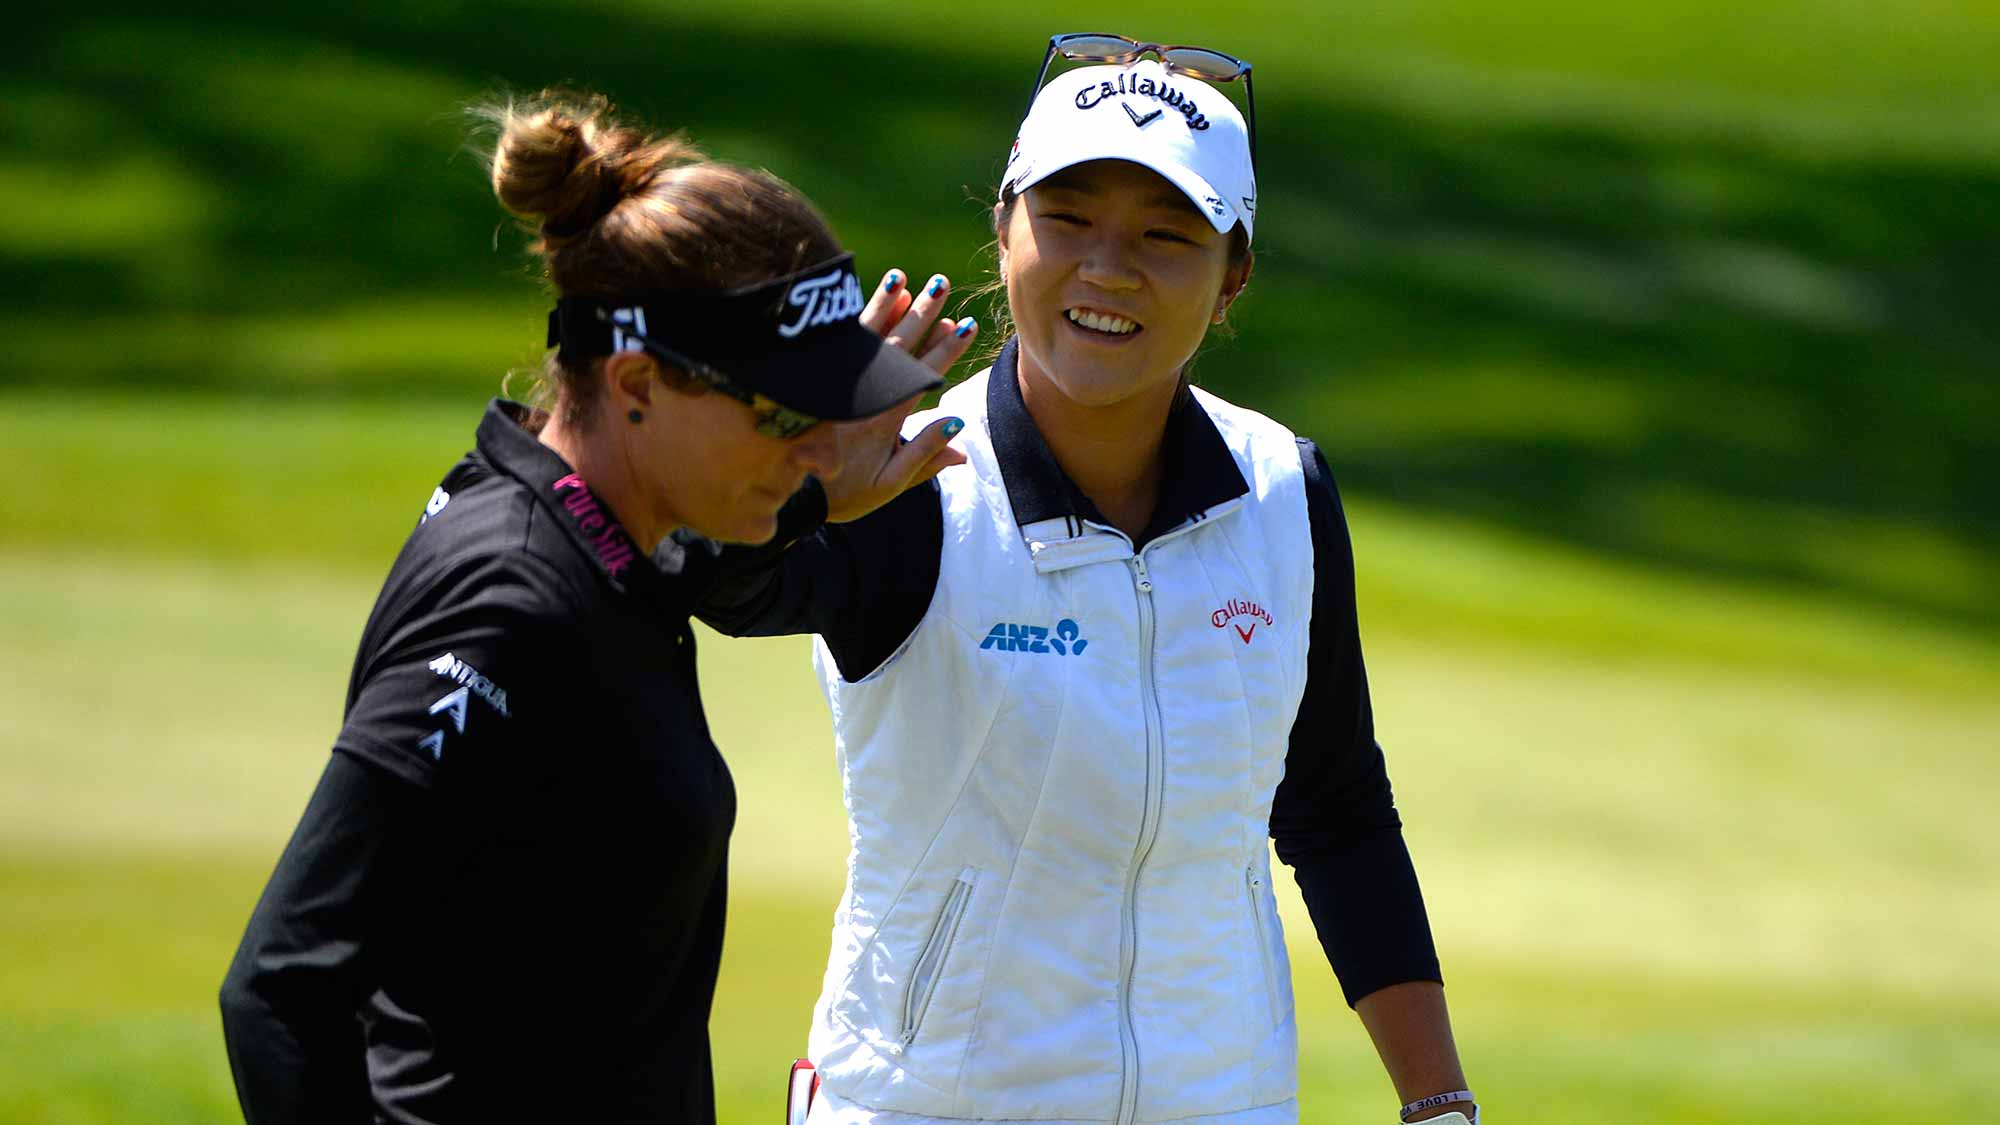 Lydia Ko of New Zealand celebrates a chip shot for a birdie on the fourth hole with Brittany Lang during round three of the Swinging Skirts LPGA Classic presented by CTBC at the Lake Merced Golf Club 